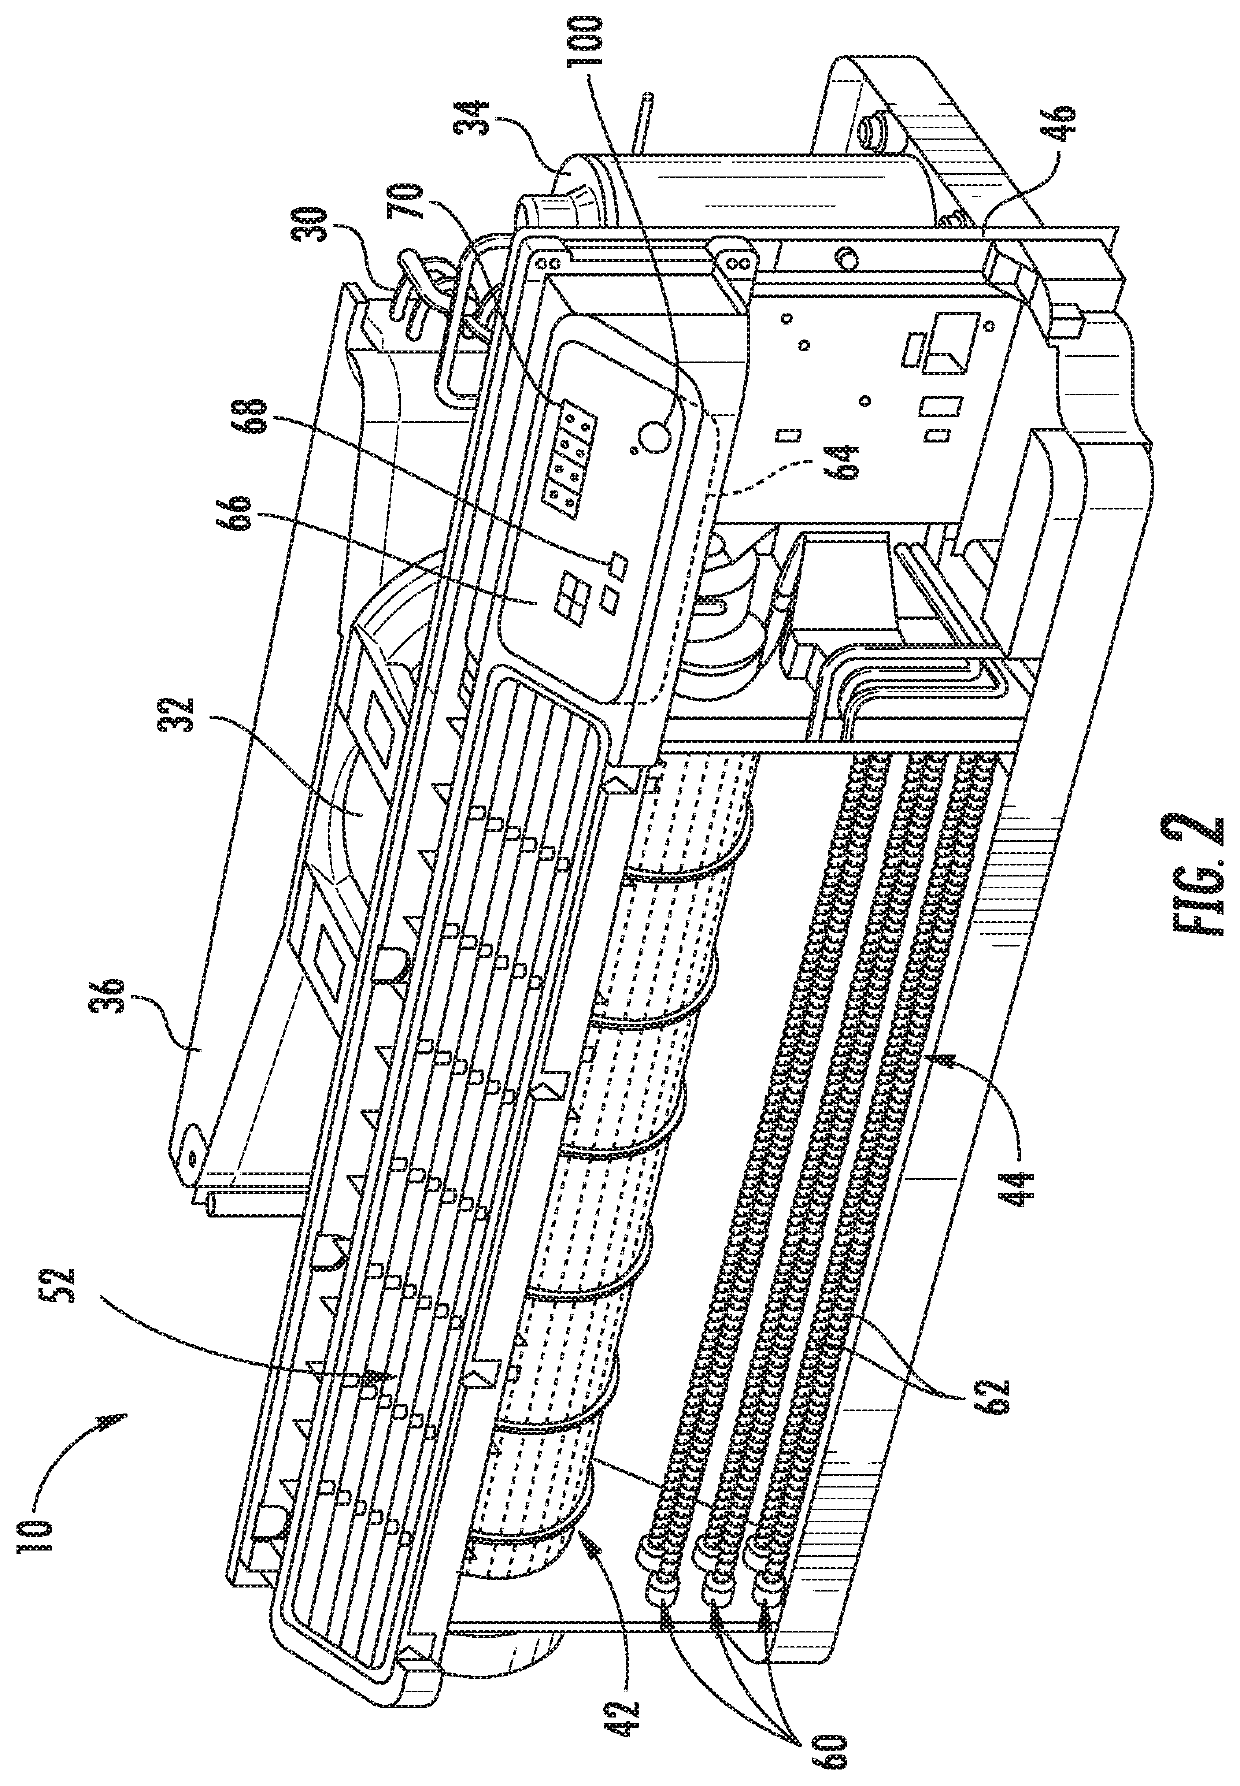 System and method for operating a packaged terminal air conditioner unit